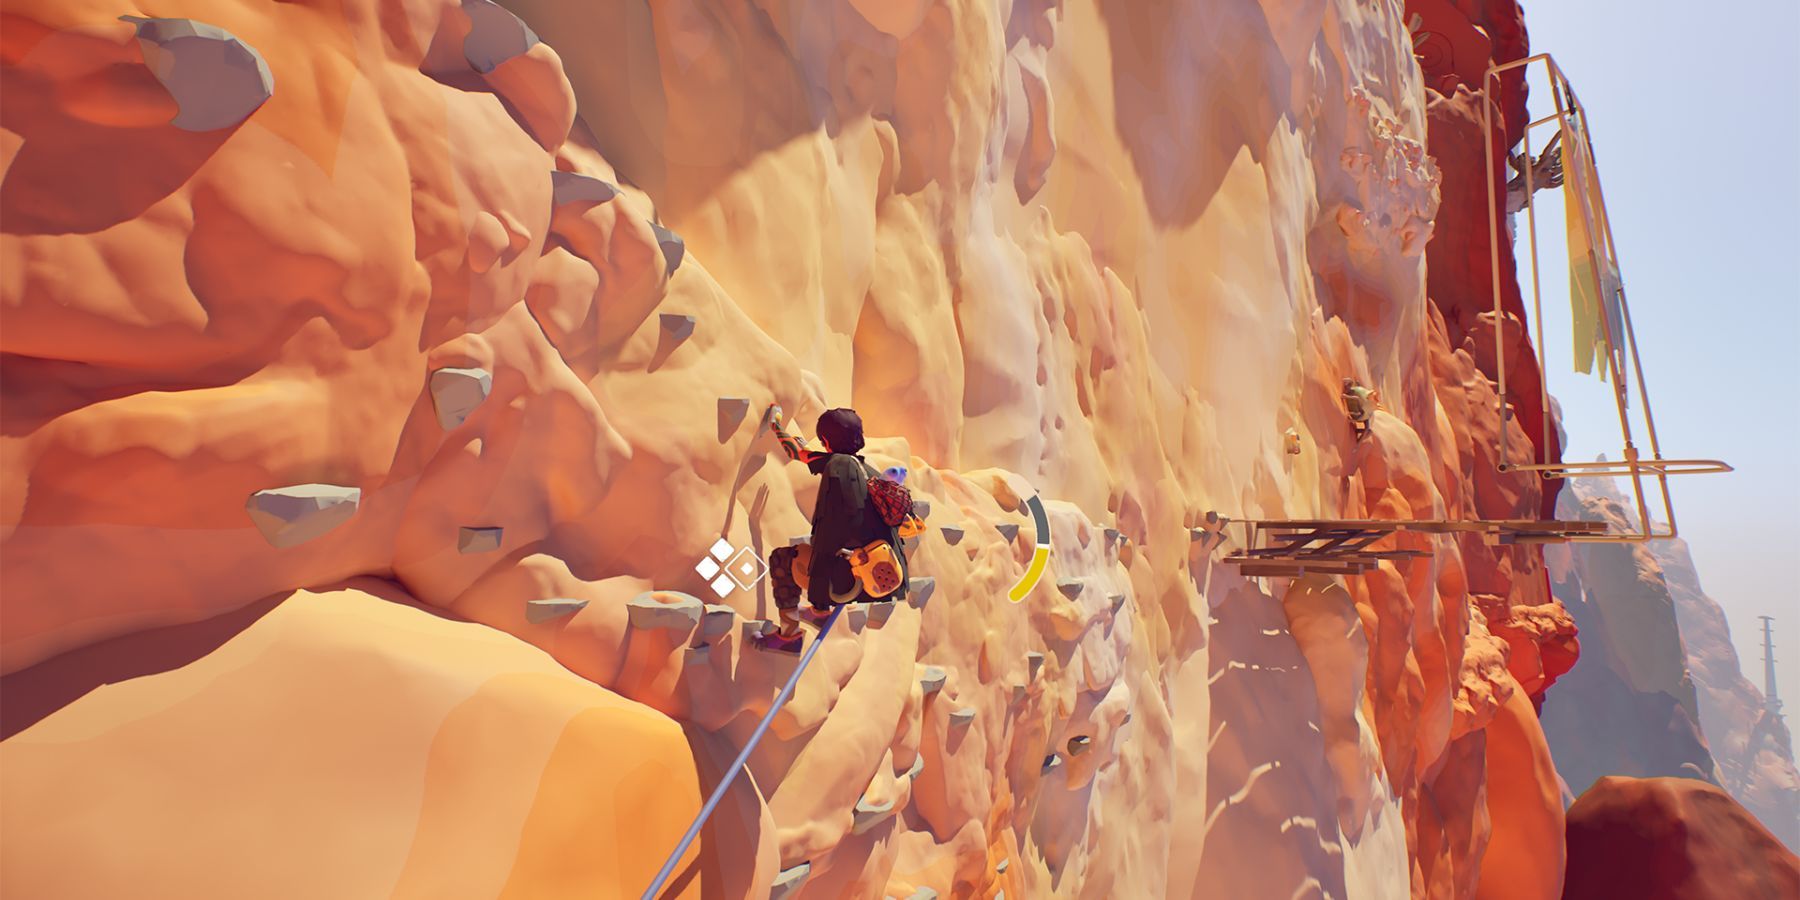 The protagonist climbs a sheer mountain face with lots of handholds and platforms on it